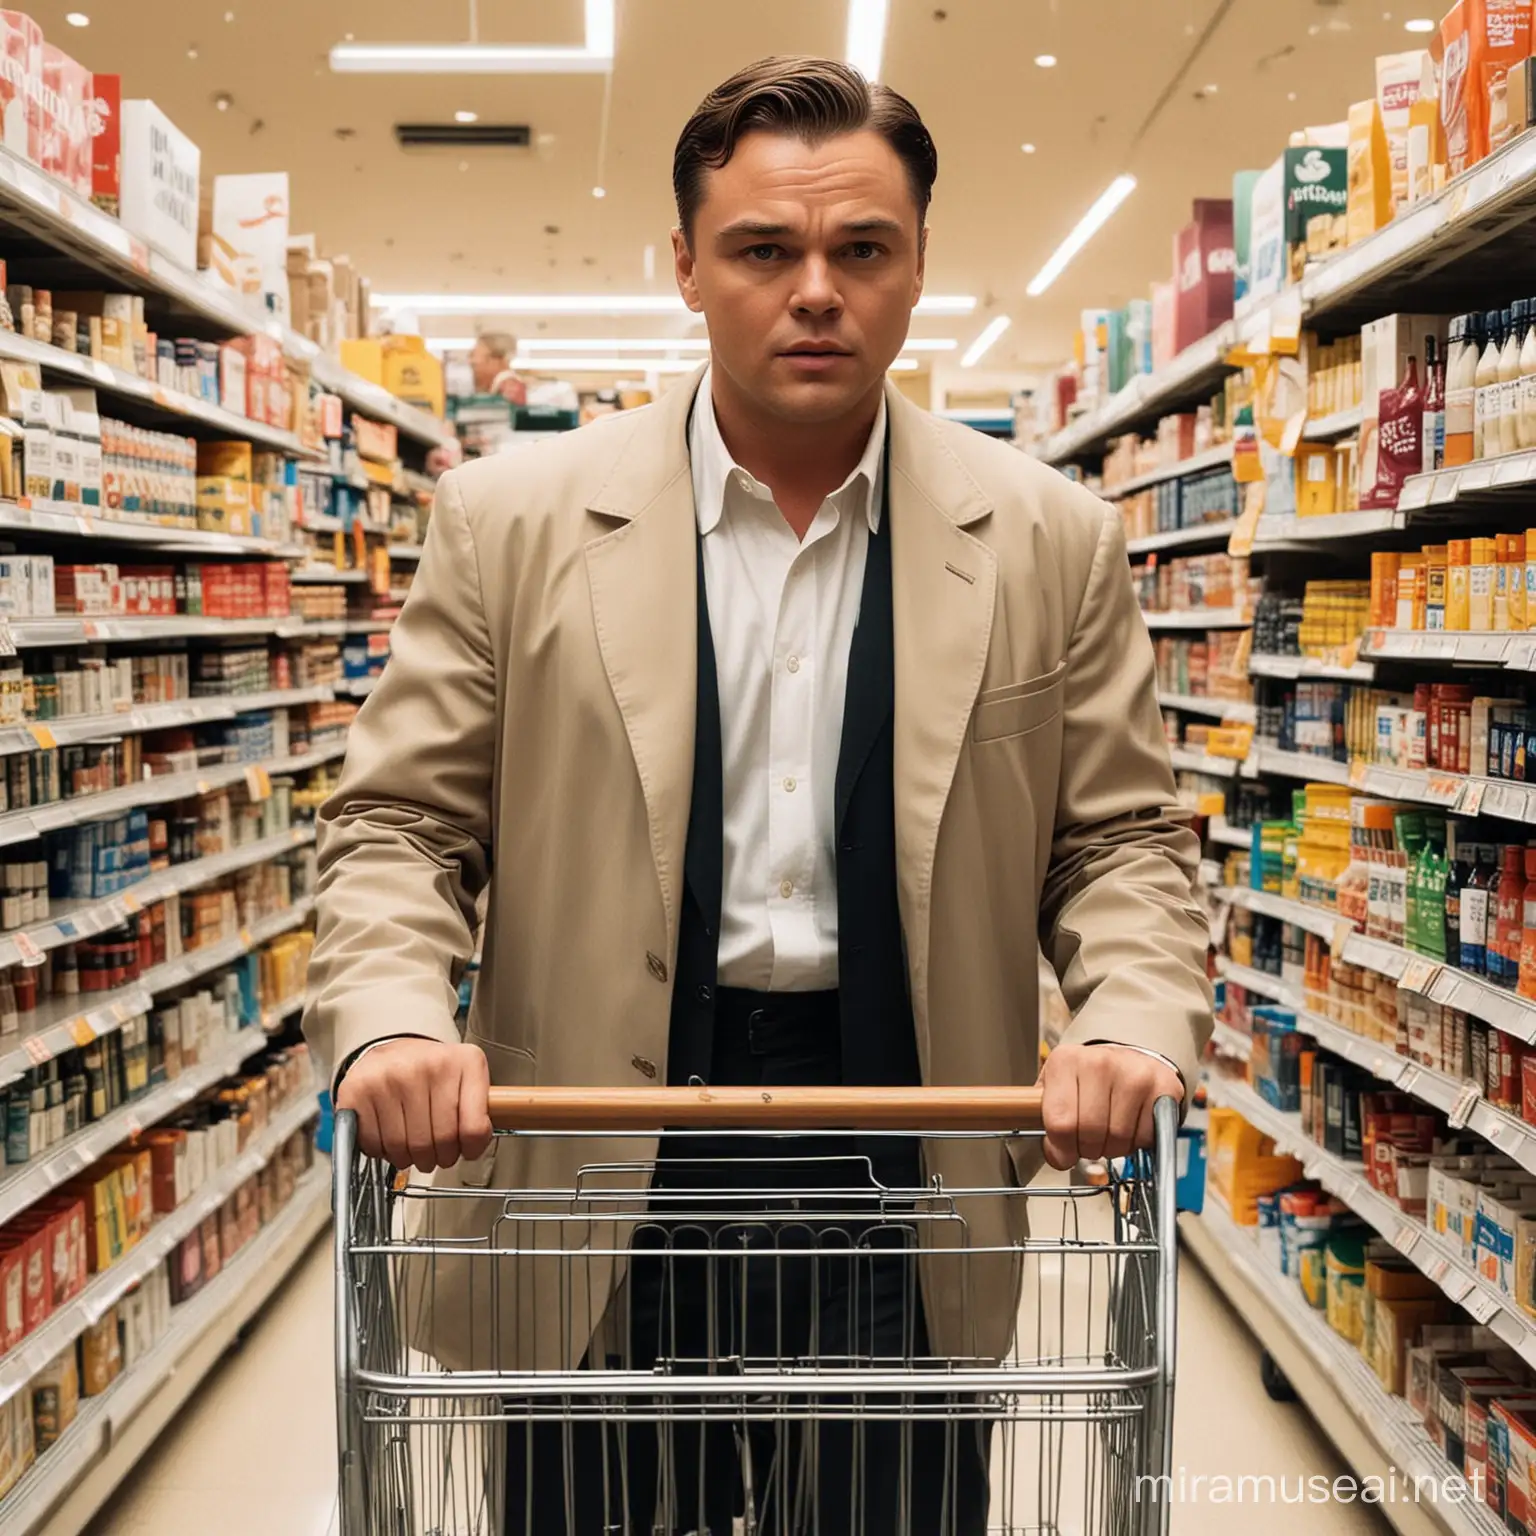 Leonardo DiCaprio Shopping with Smartphone in Hand at Grocery Store